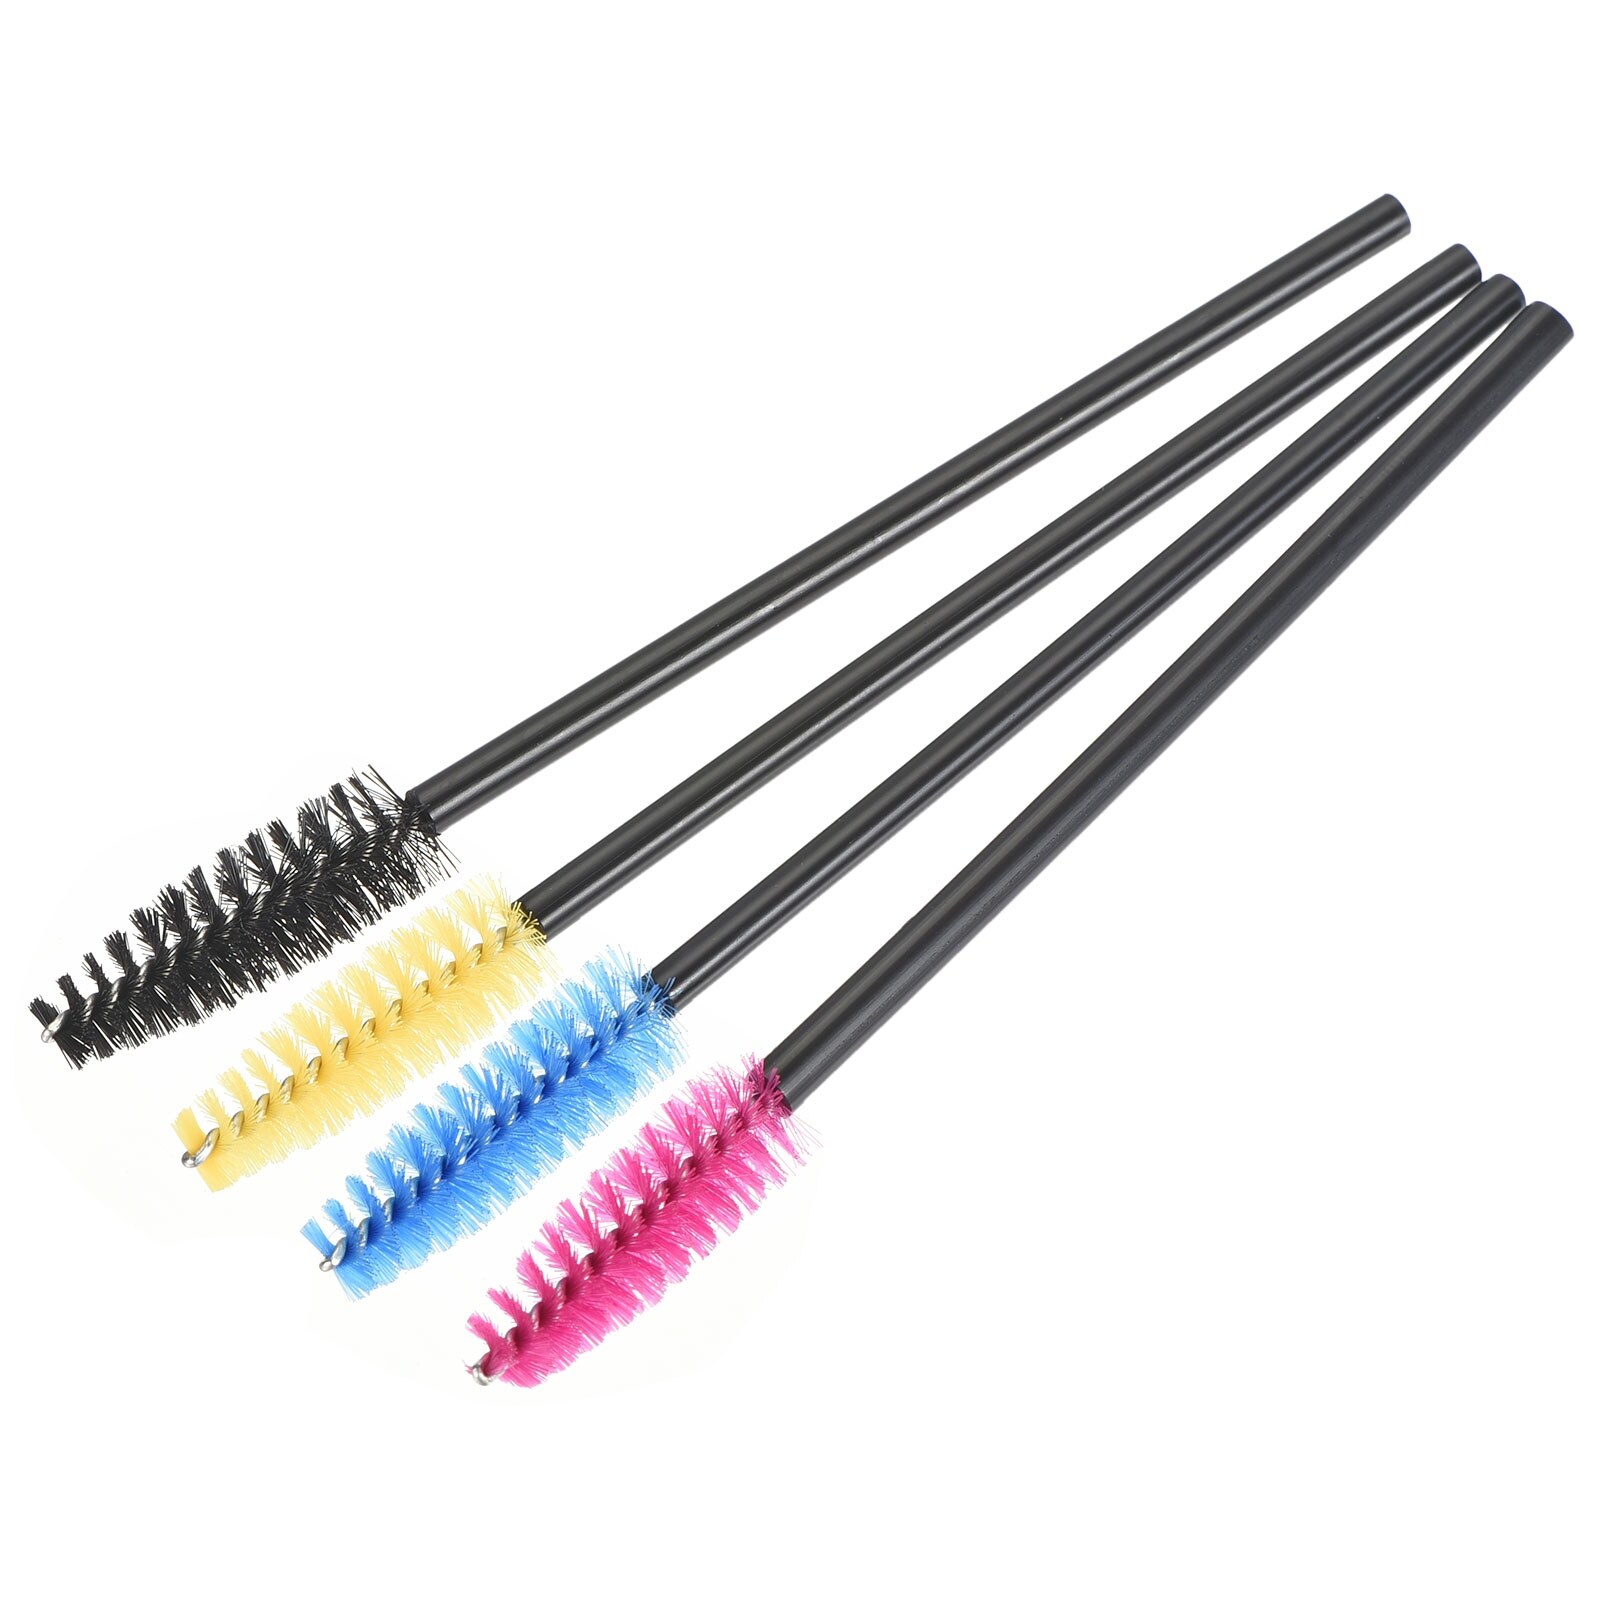 https://ak1.ostkcdn.com/images/products/is/images/direct/19ef57d5840aecfe204539e34b640f9a0940cd22/12pcs-Mini-Nylon-Brush-Spiral-Duster-Crevice-Cleaning-Tool-Black-Blue-Red-Yellow.jpg